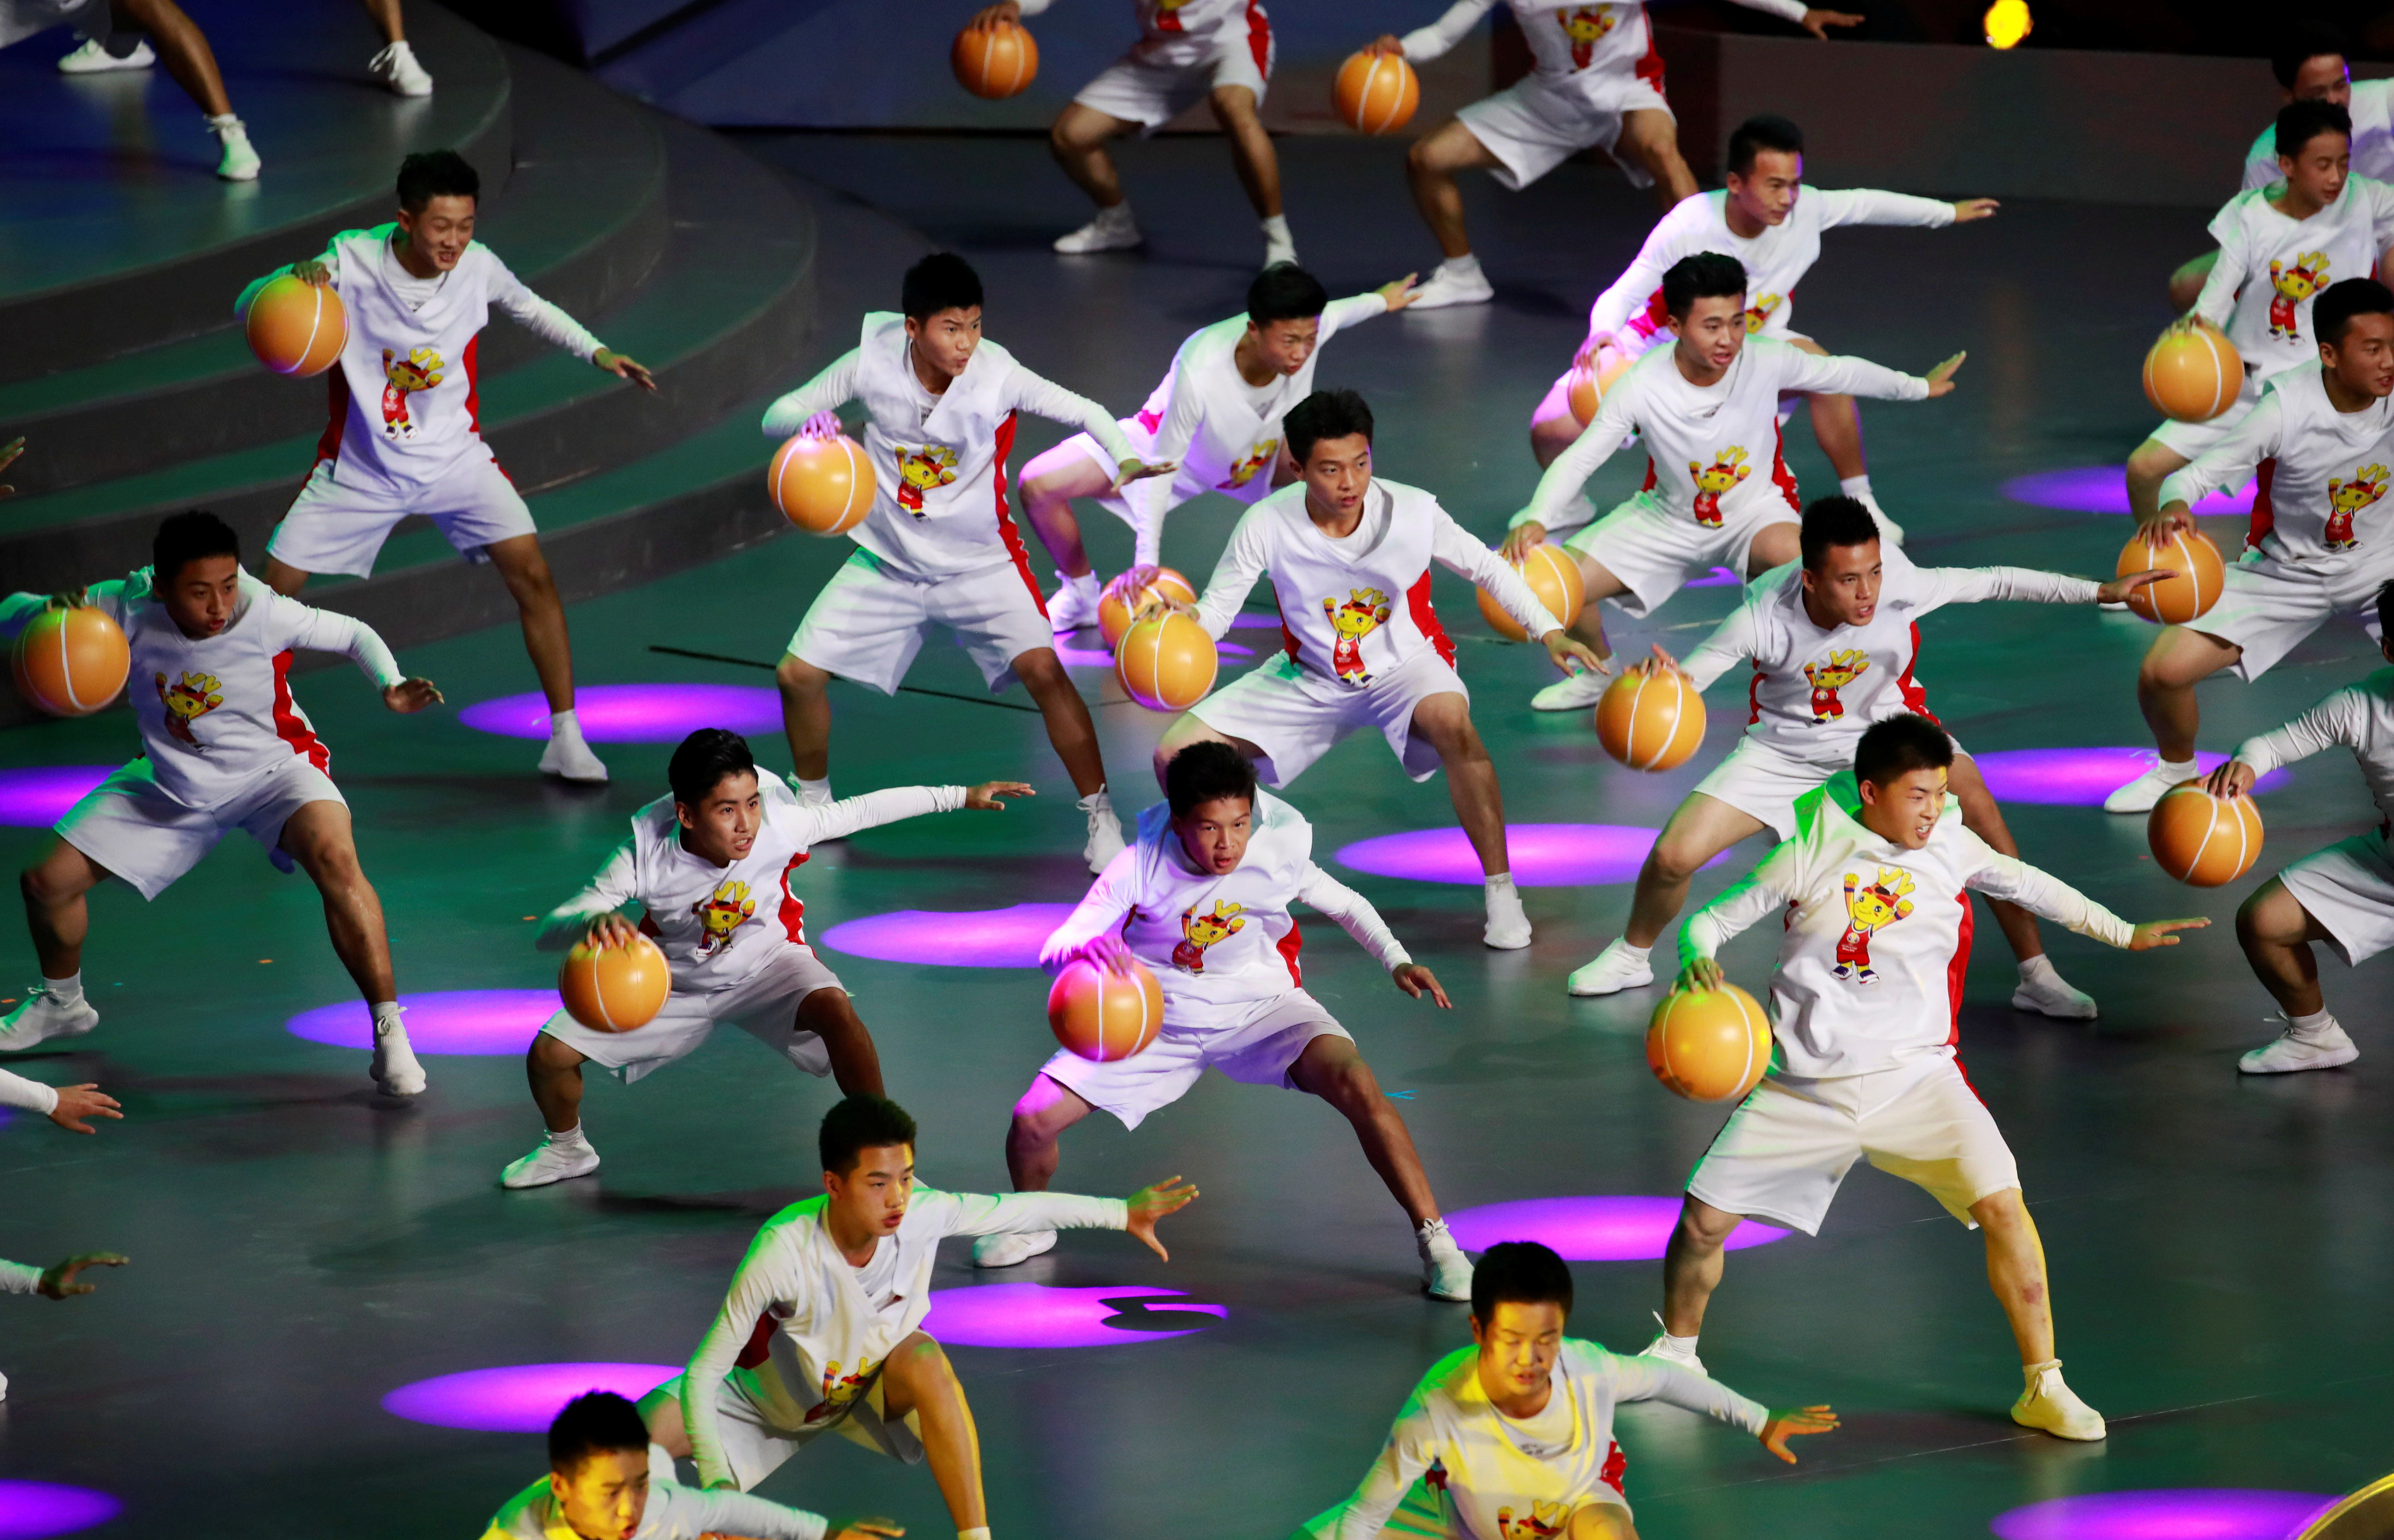 2019-08-30T151733Z_84996137_RC13D8A28A60_RTRMADP_3_BASKETBALL-WORLDCUP